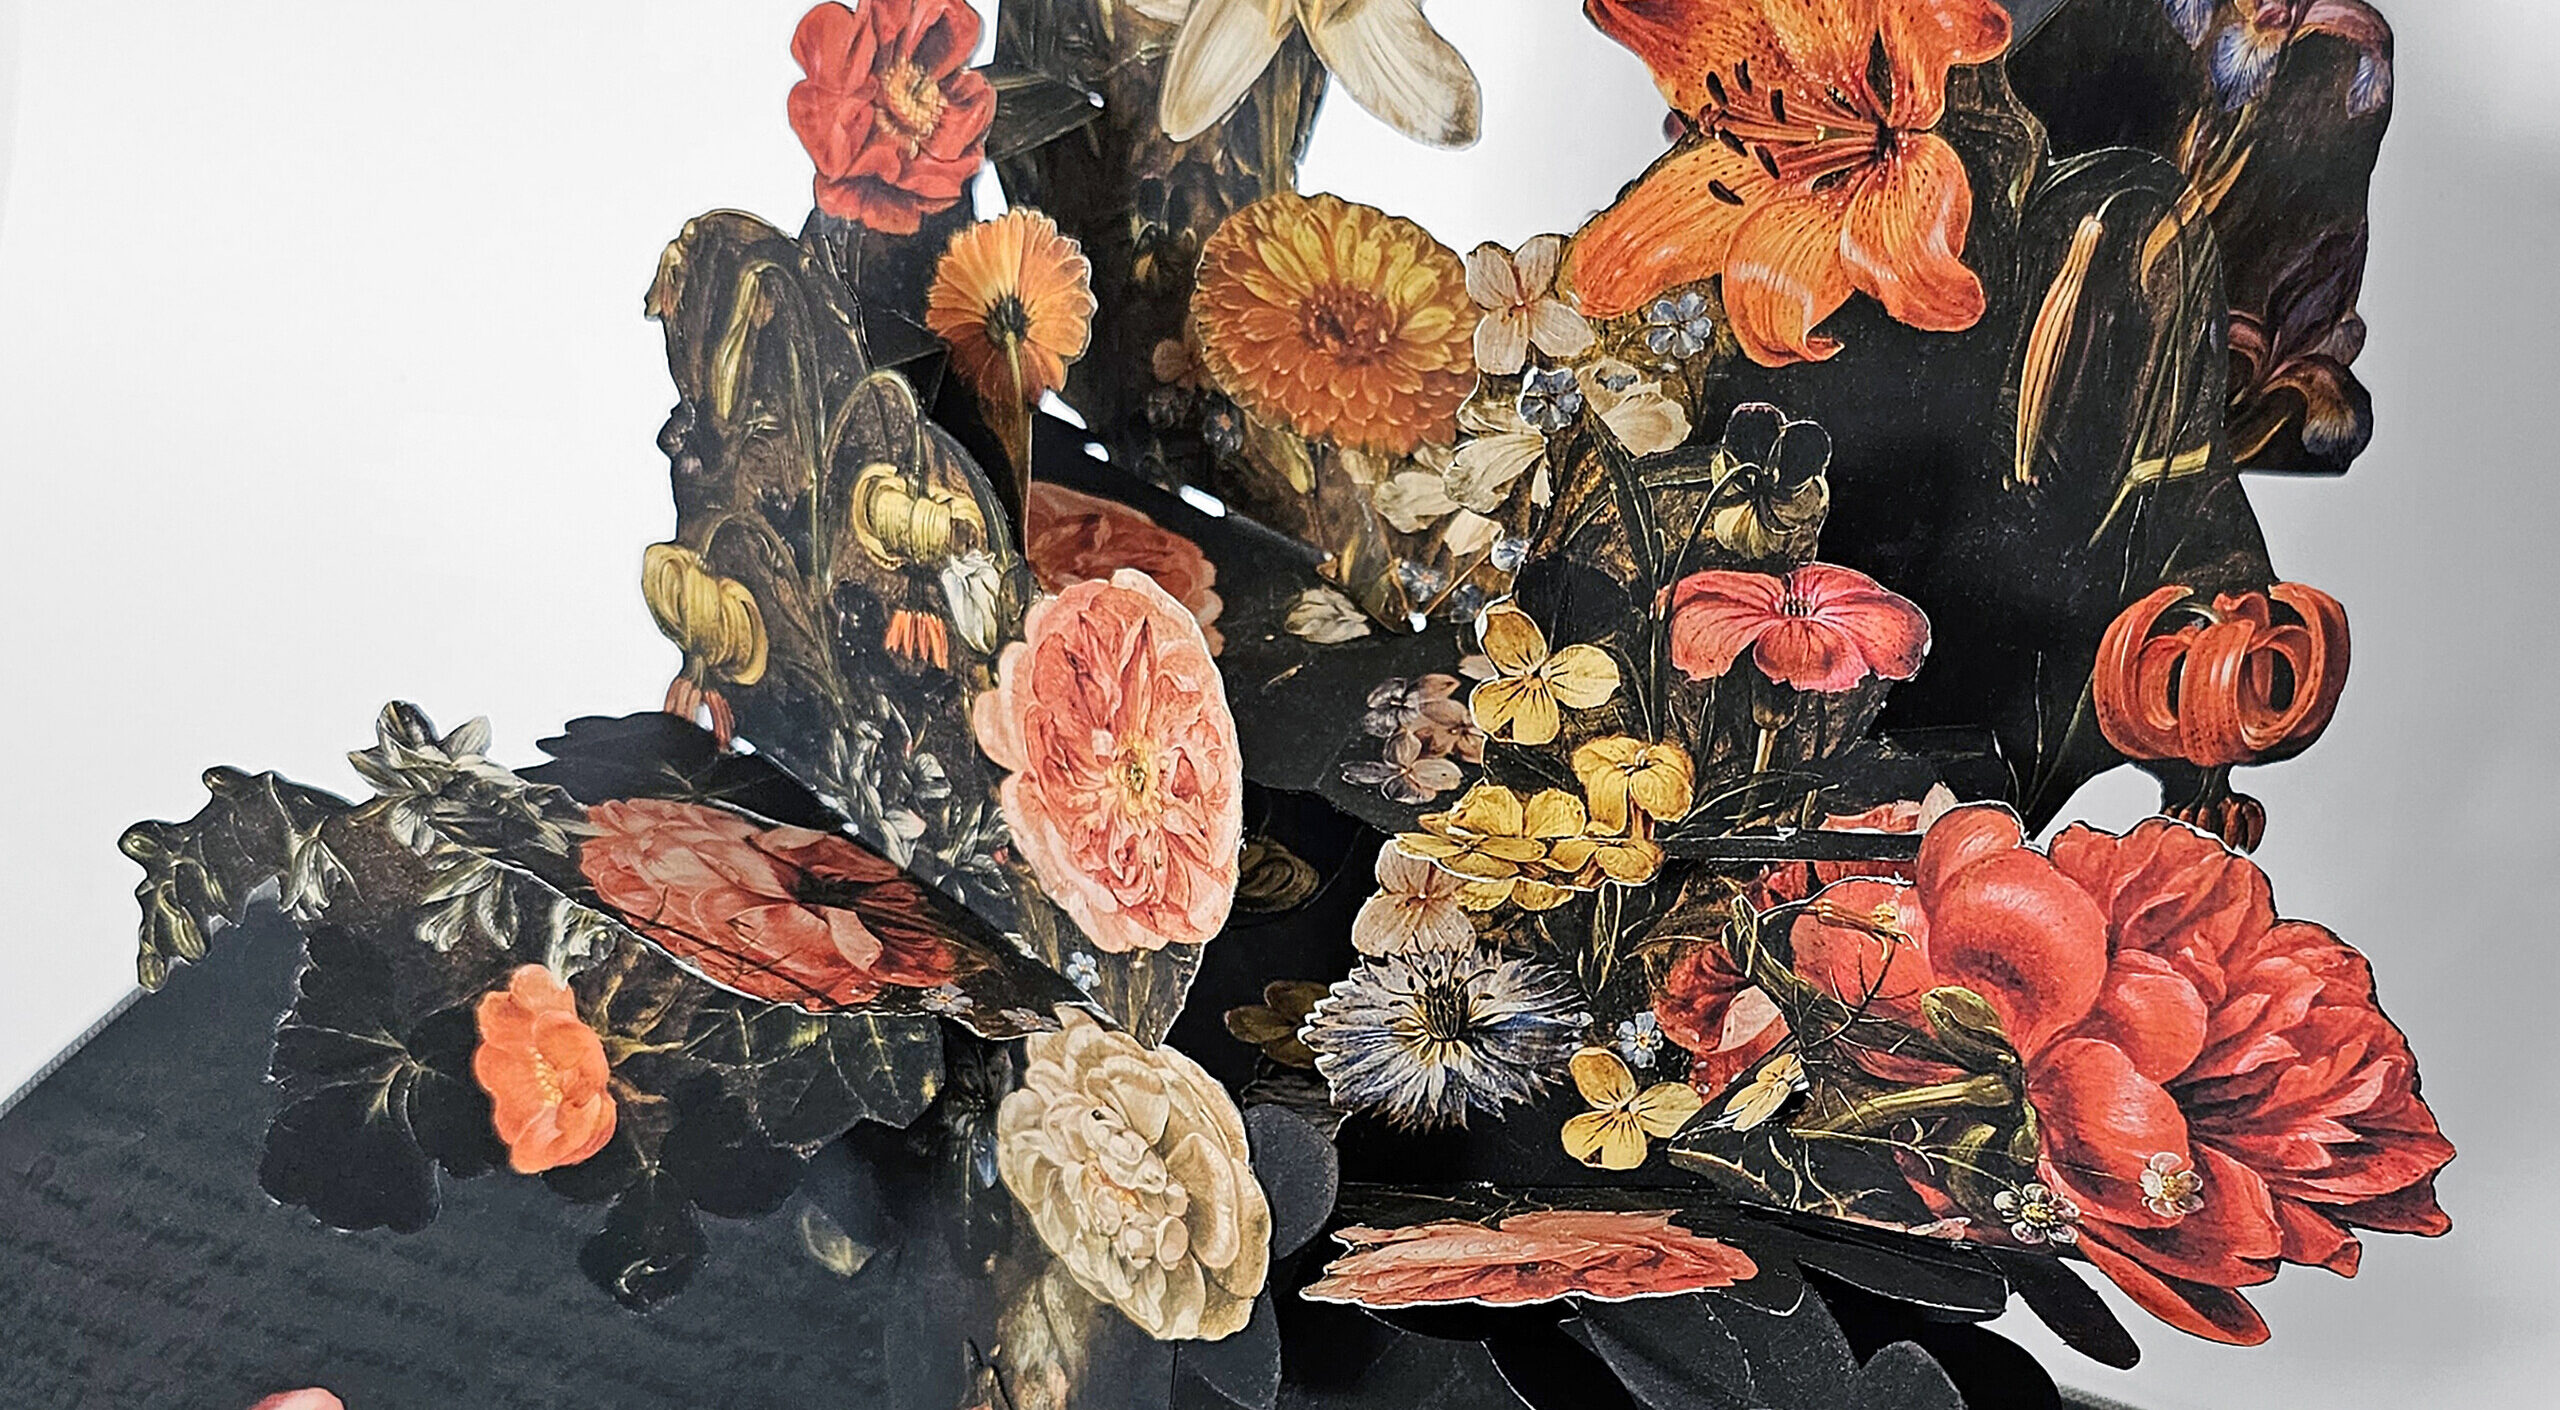 An artist's book, opened to reveal a pop-up of many colorful flowers in a vase. The pages are dark with black writing.